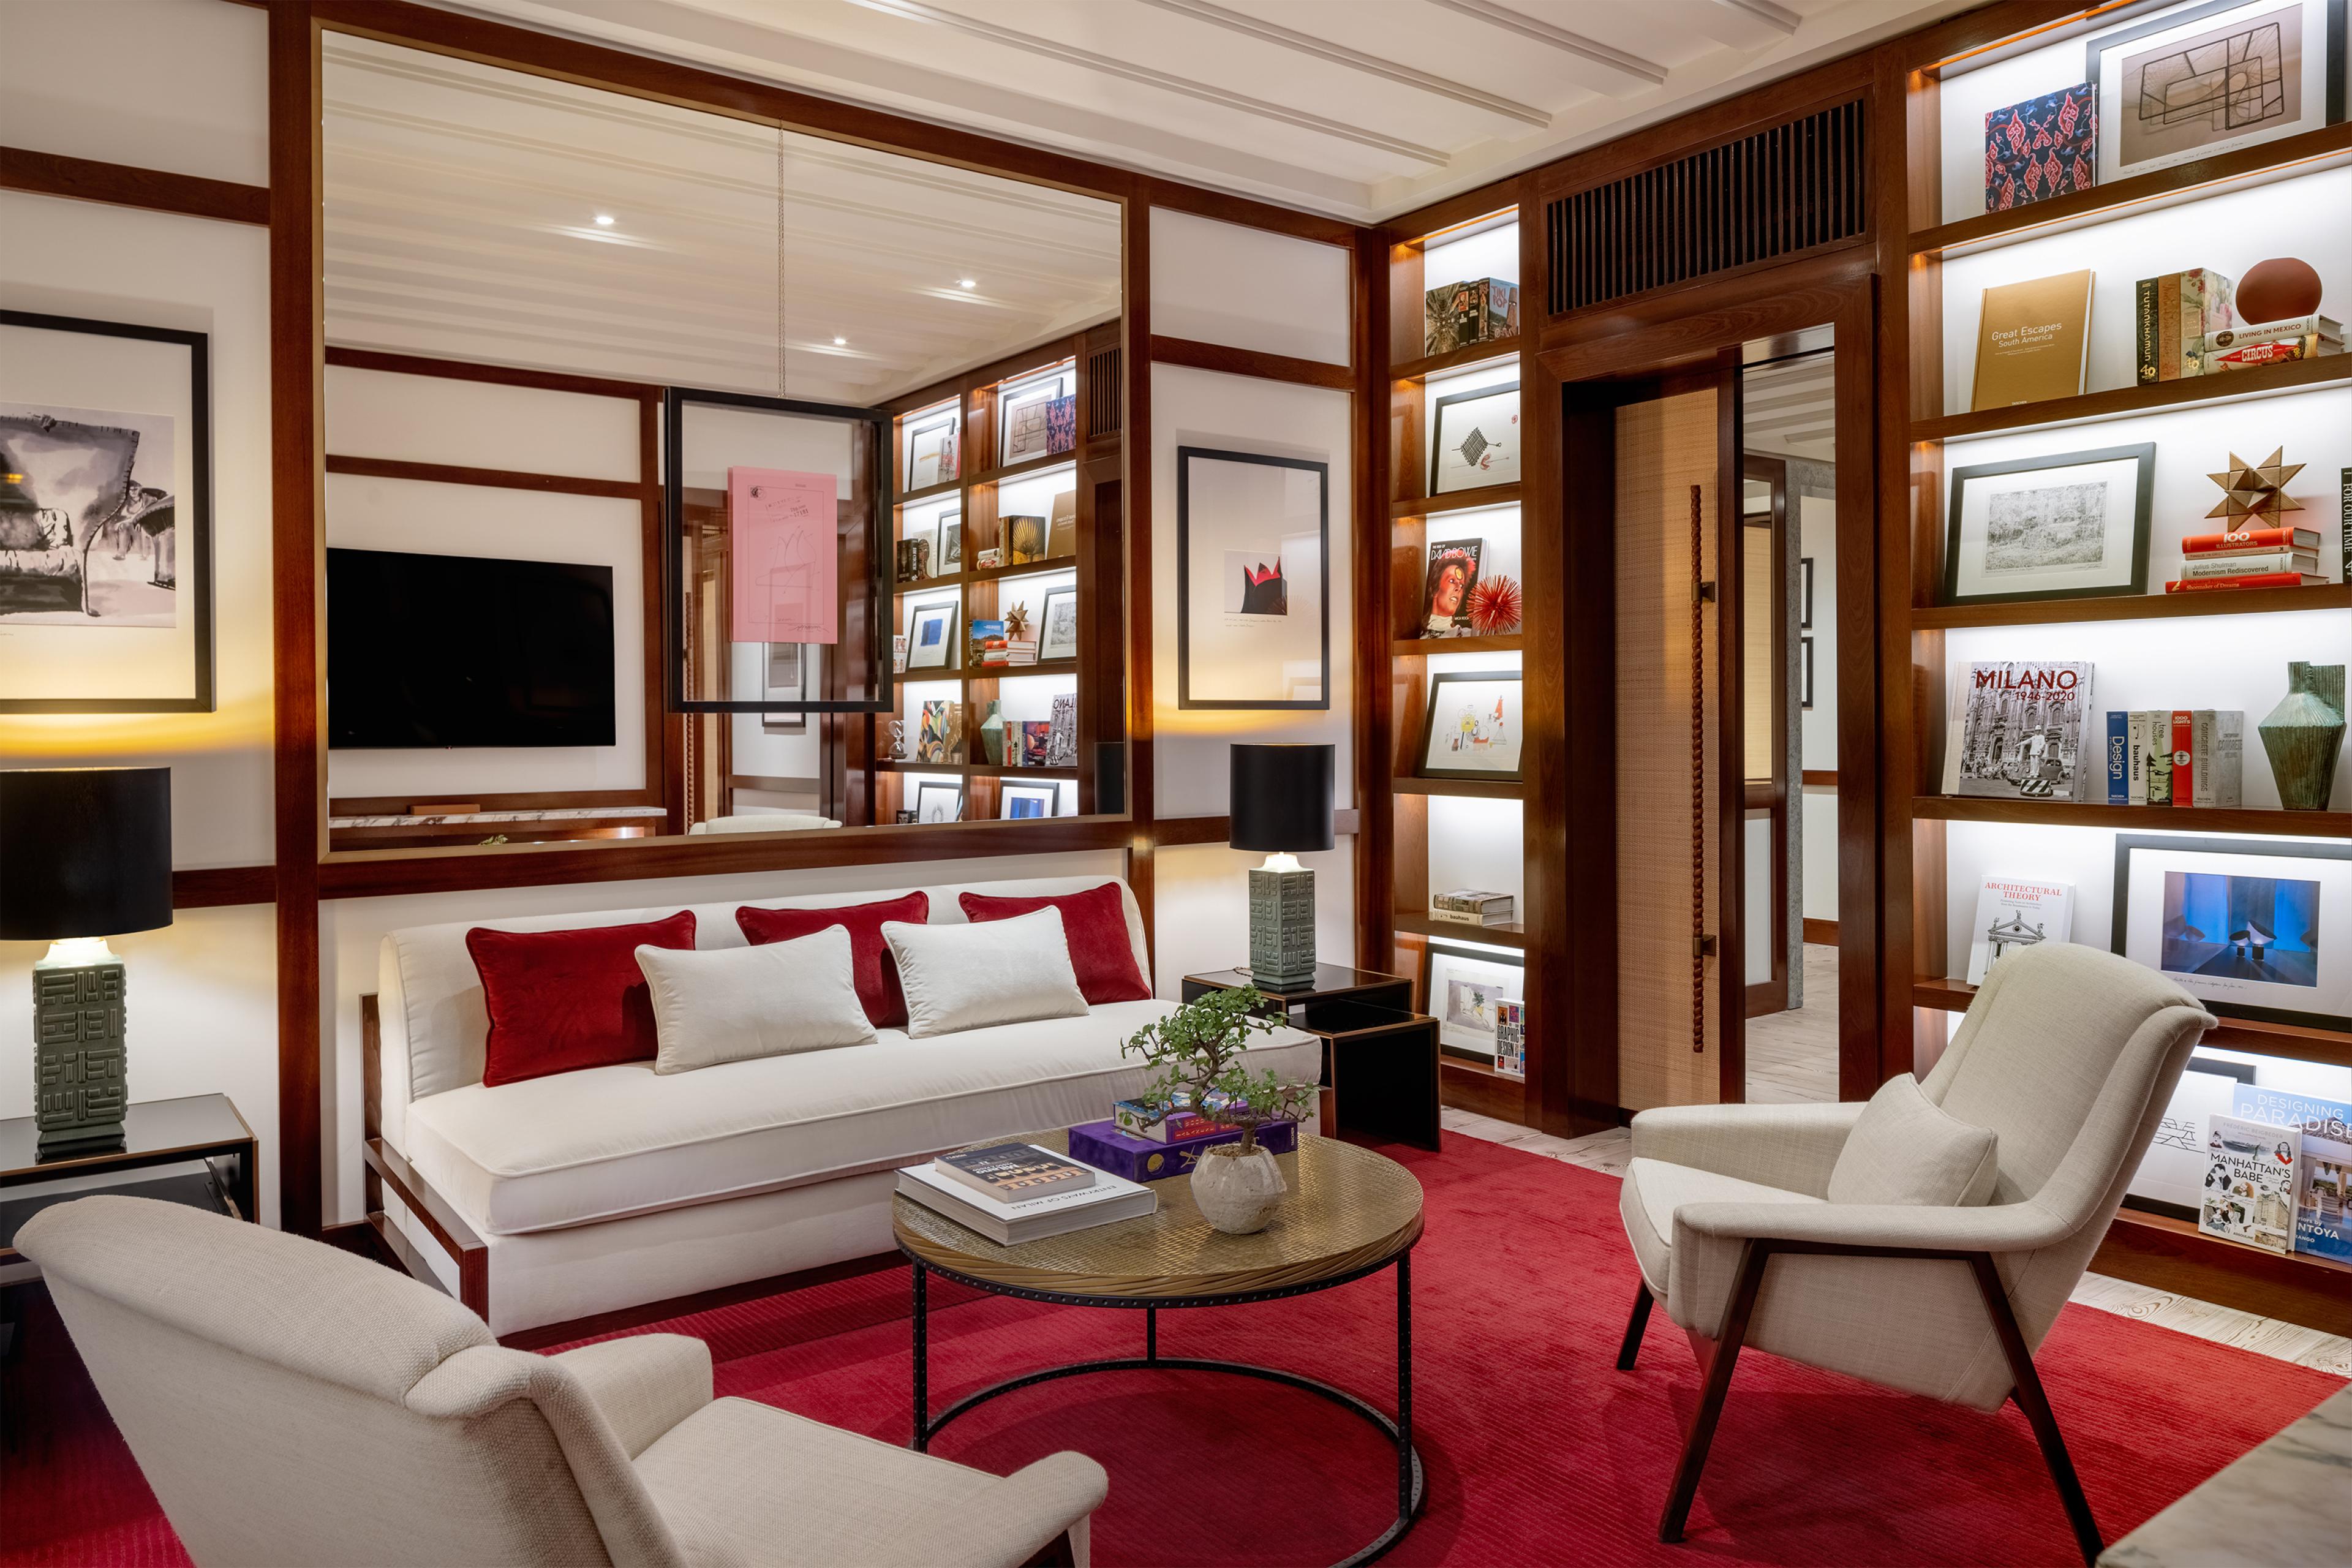 a hotel room living area with red accents, sleek white lighting and warm dark wood furnishings as well as well-lit bookcases 